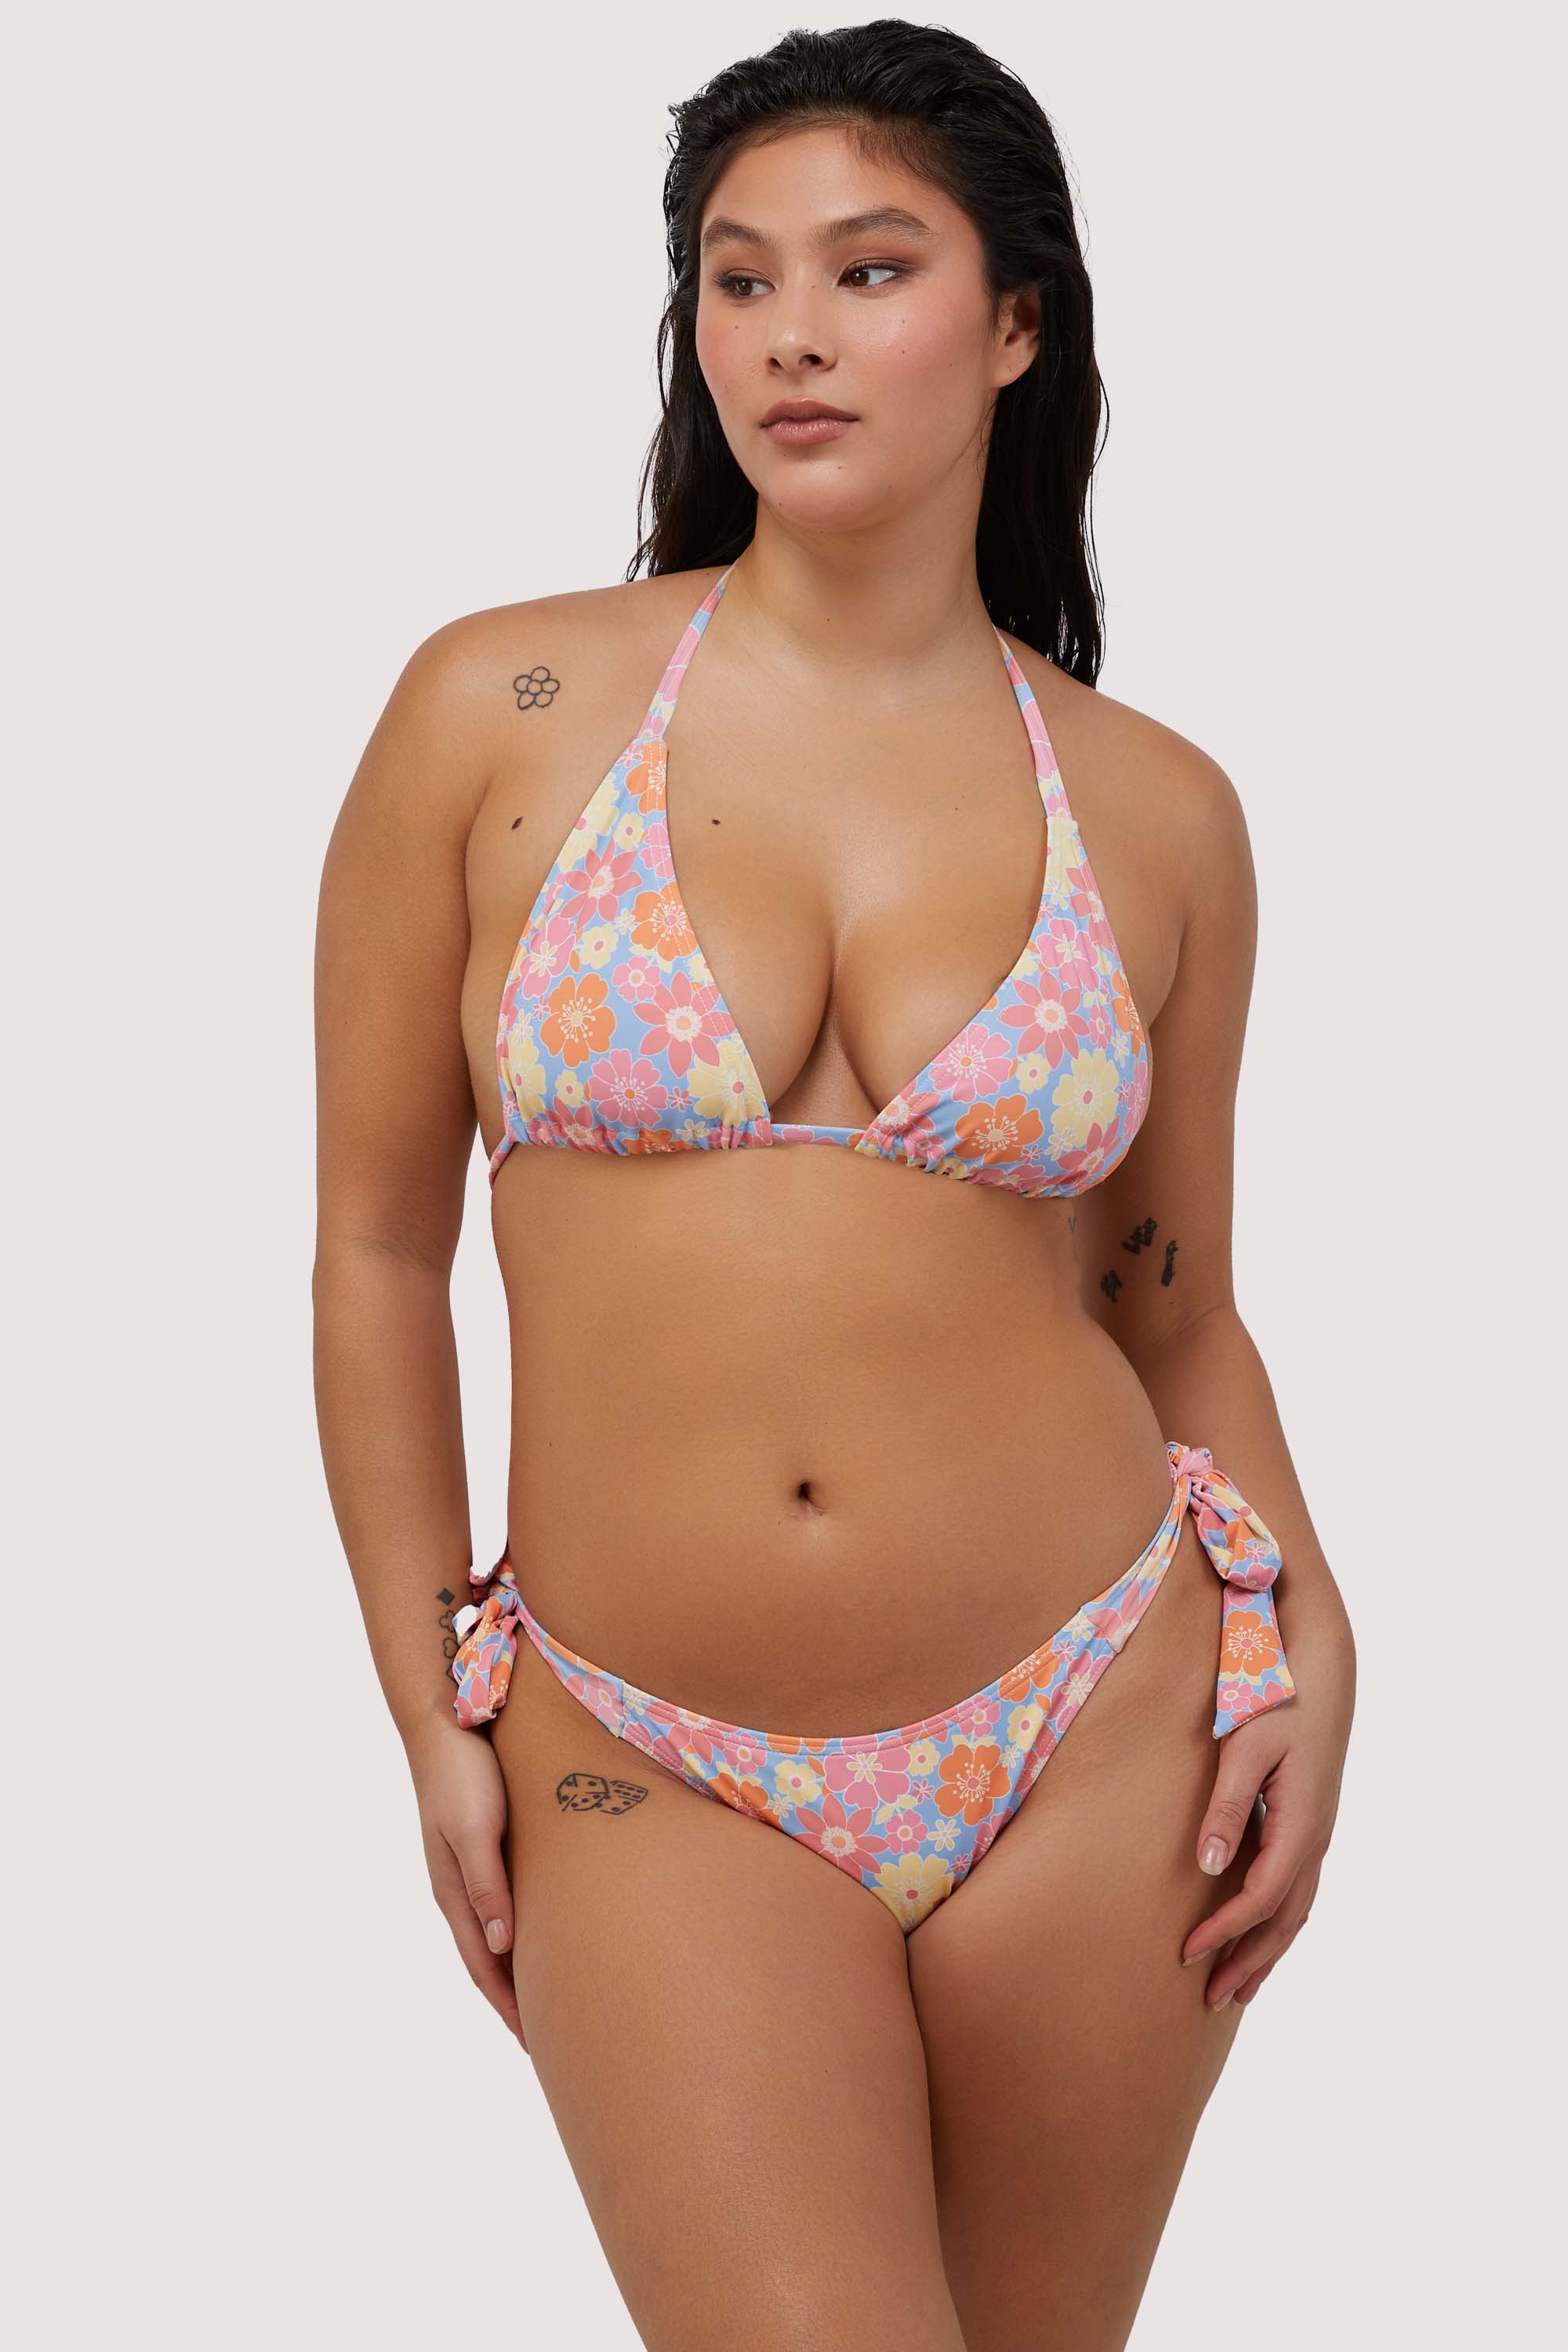 Floral Triangle Bikini Top Fuller Bust Exclusive